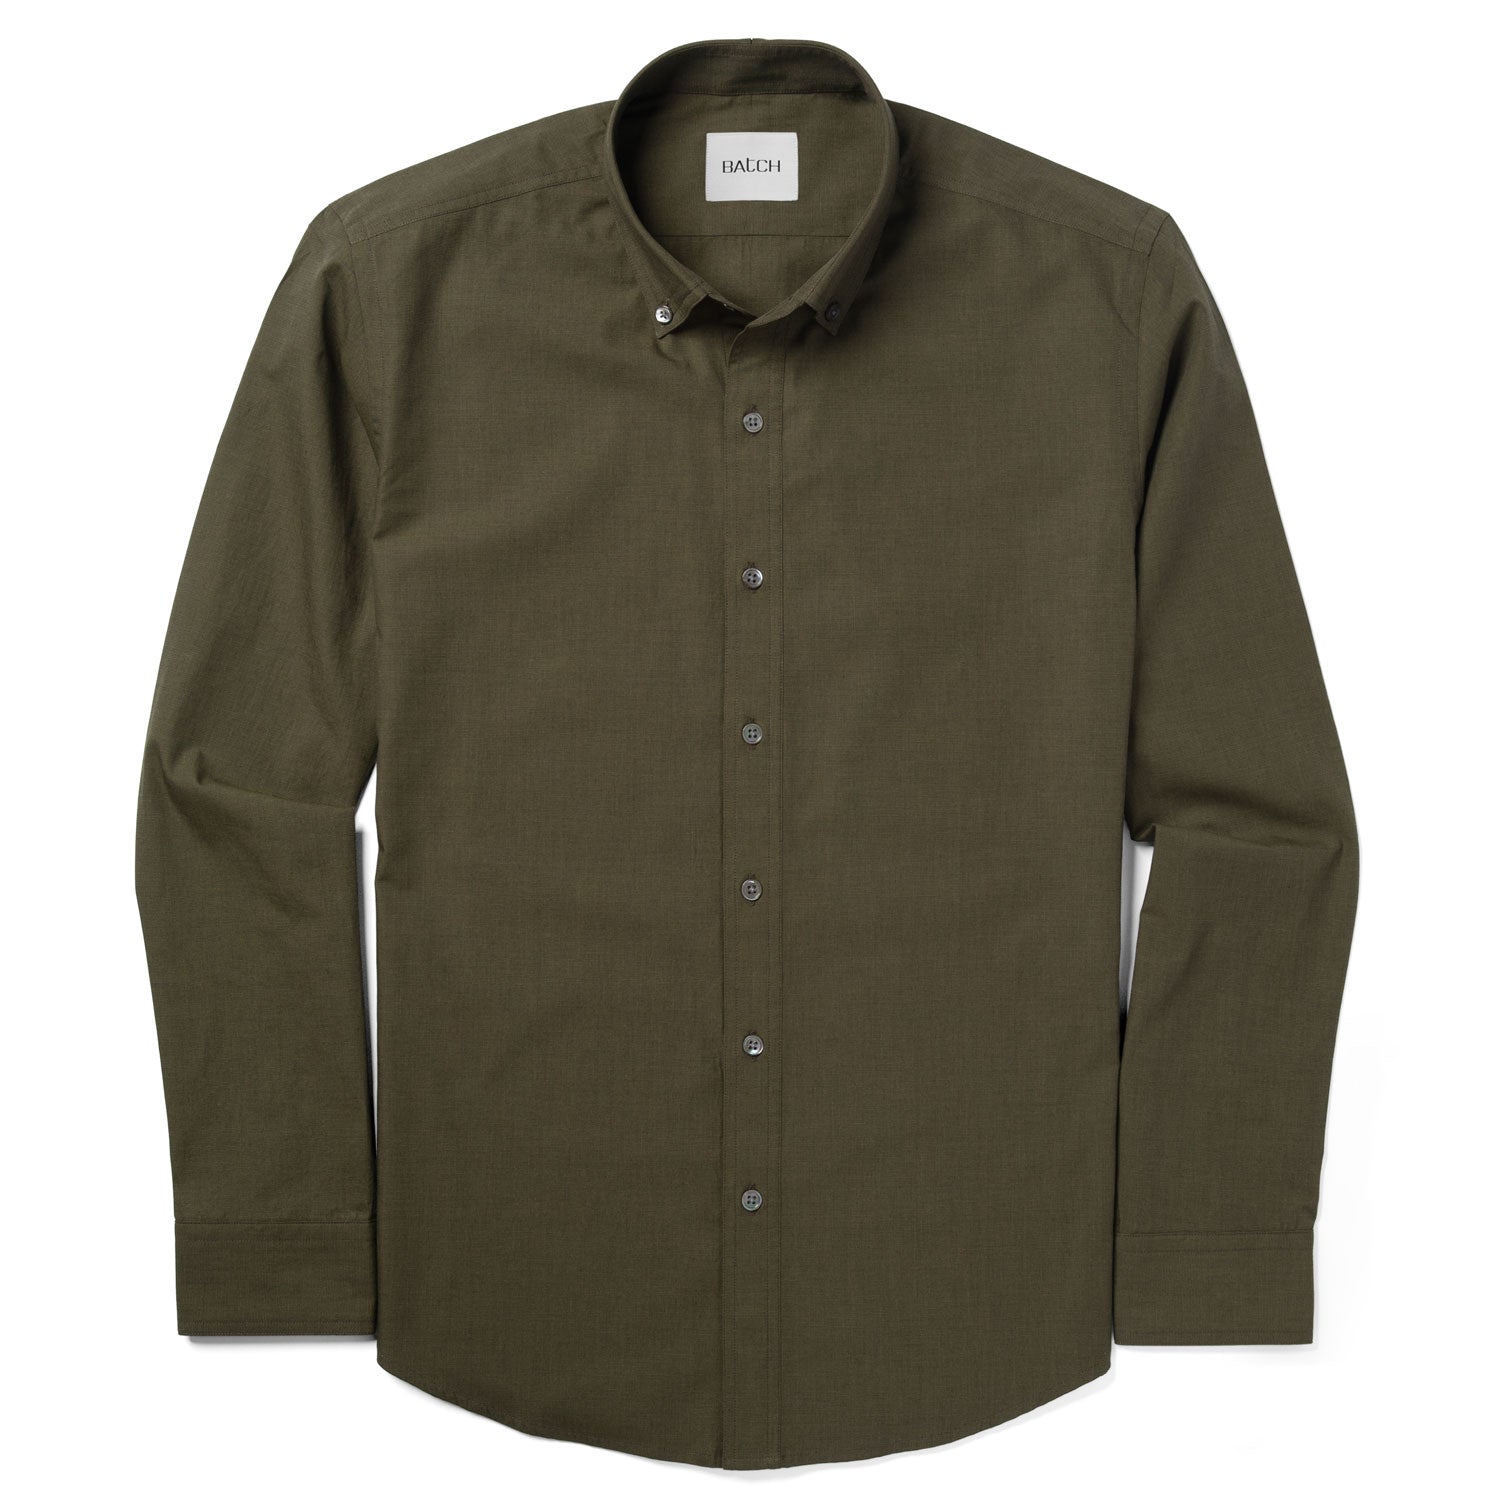 Essential Casual Shirt - Olive Green Cotton End-on-end